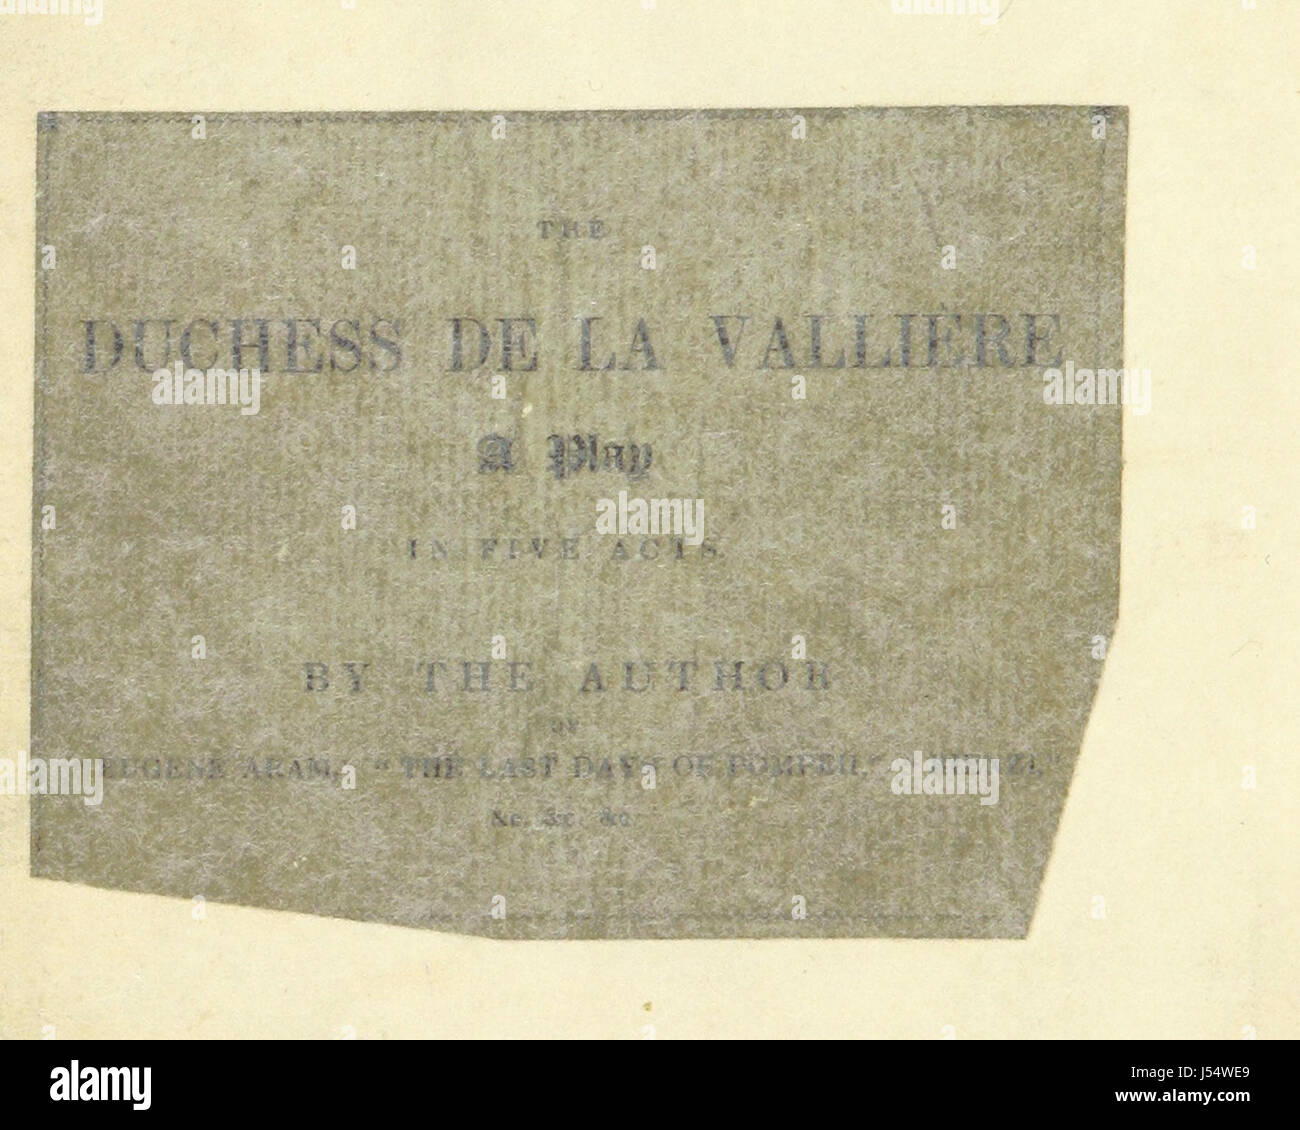 The Duchess de la Vallière. A play in five acts. By the author of “Eugene Aram,” etc. [The preface signed: E. L. B., i.e. Edward G. E. L. Bulwer, afterwards Bulwer-Lytton.] Stock Photo